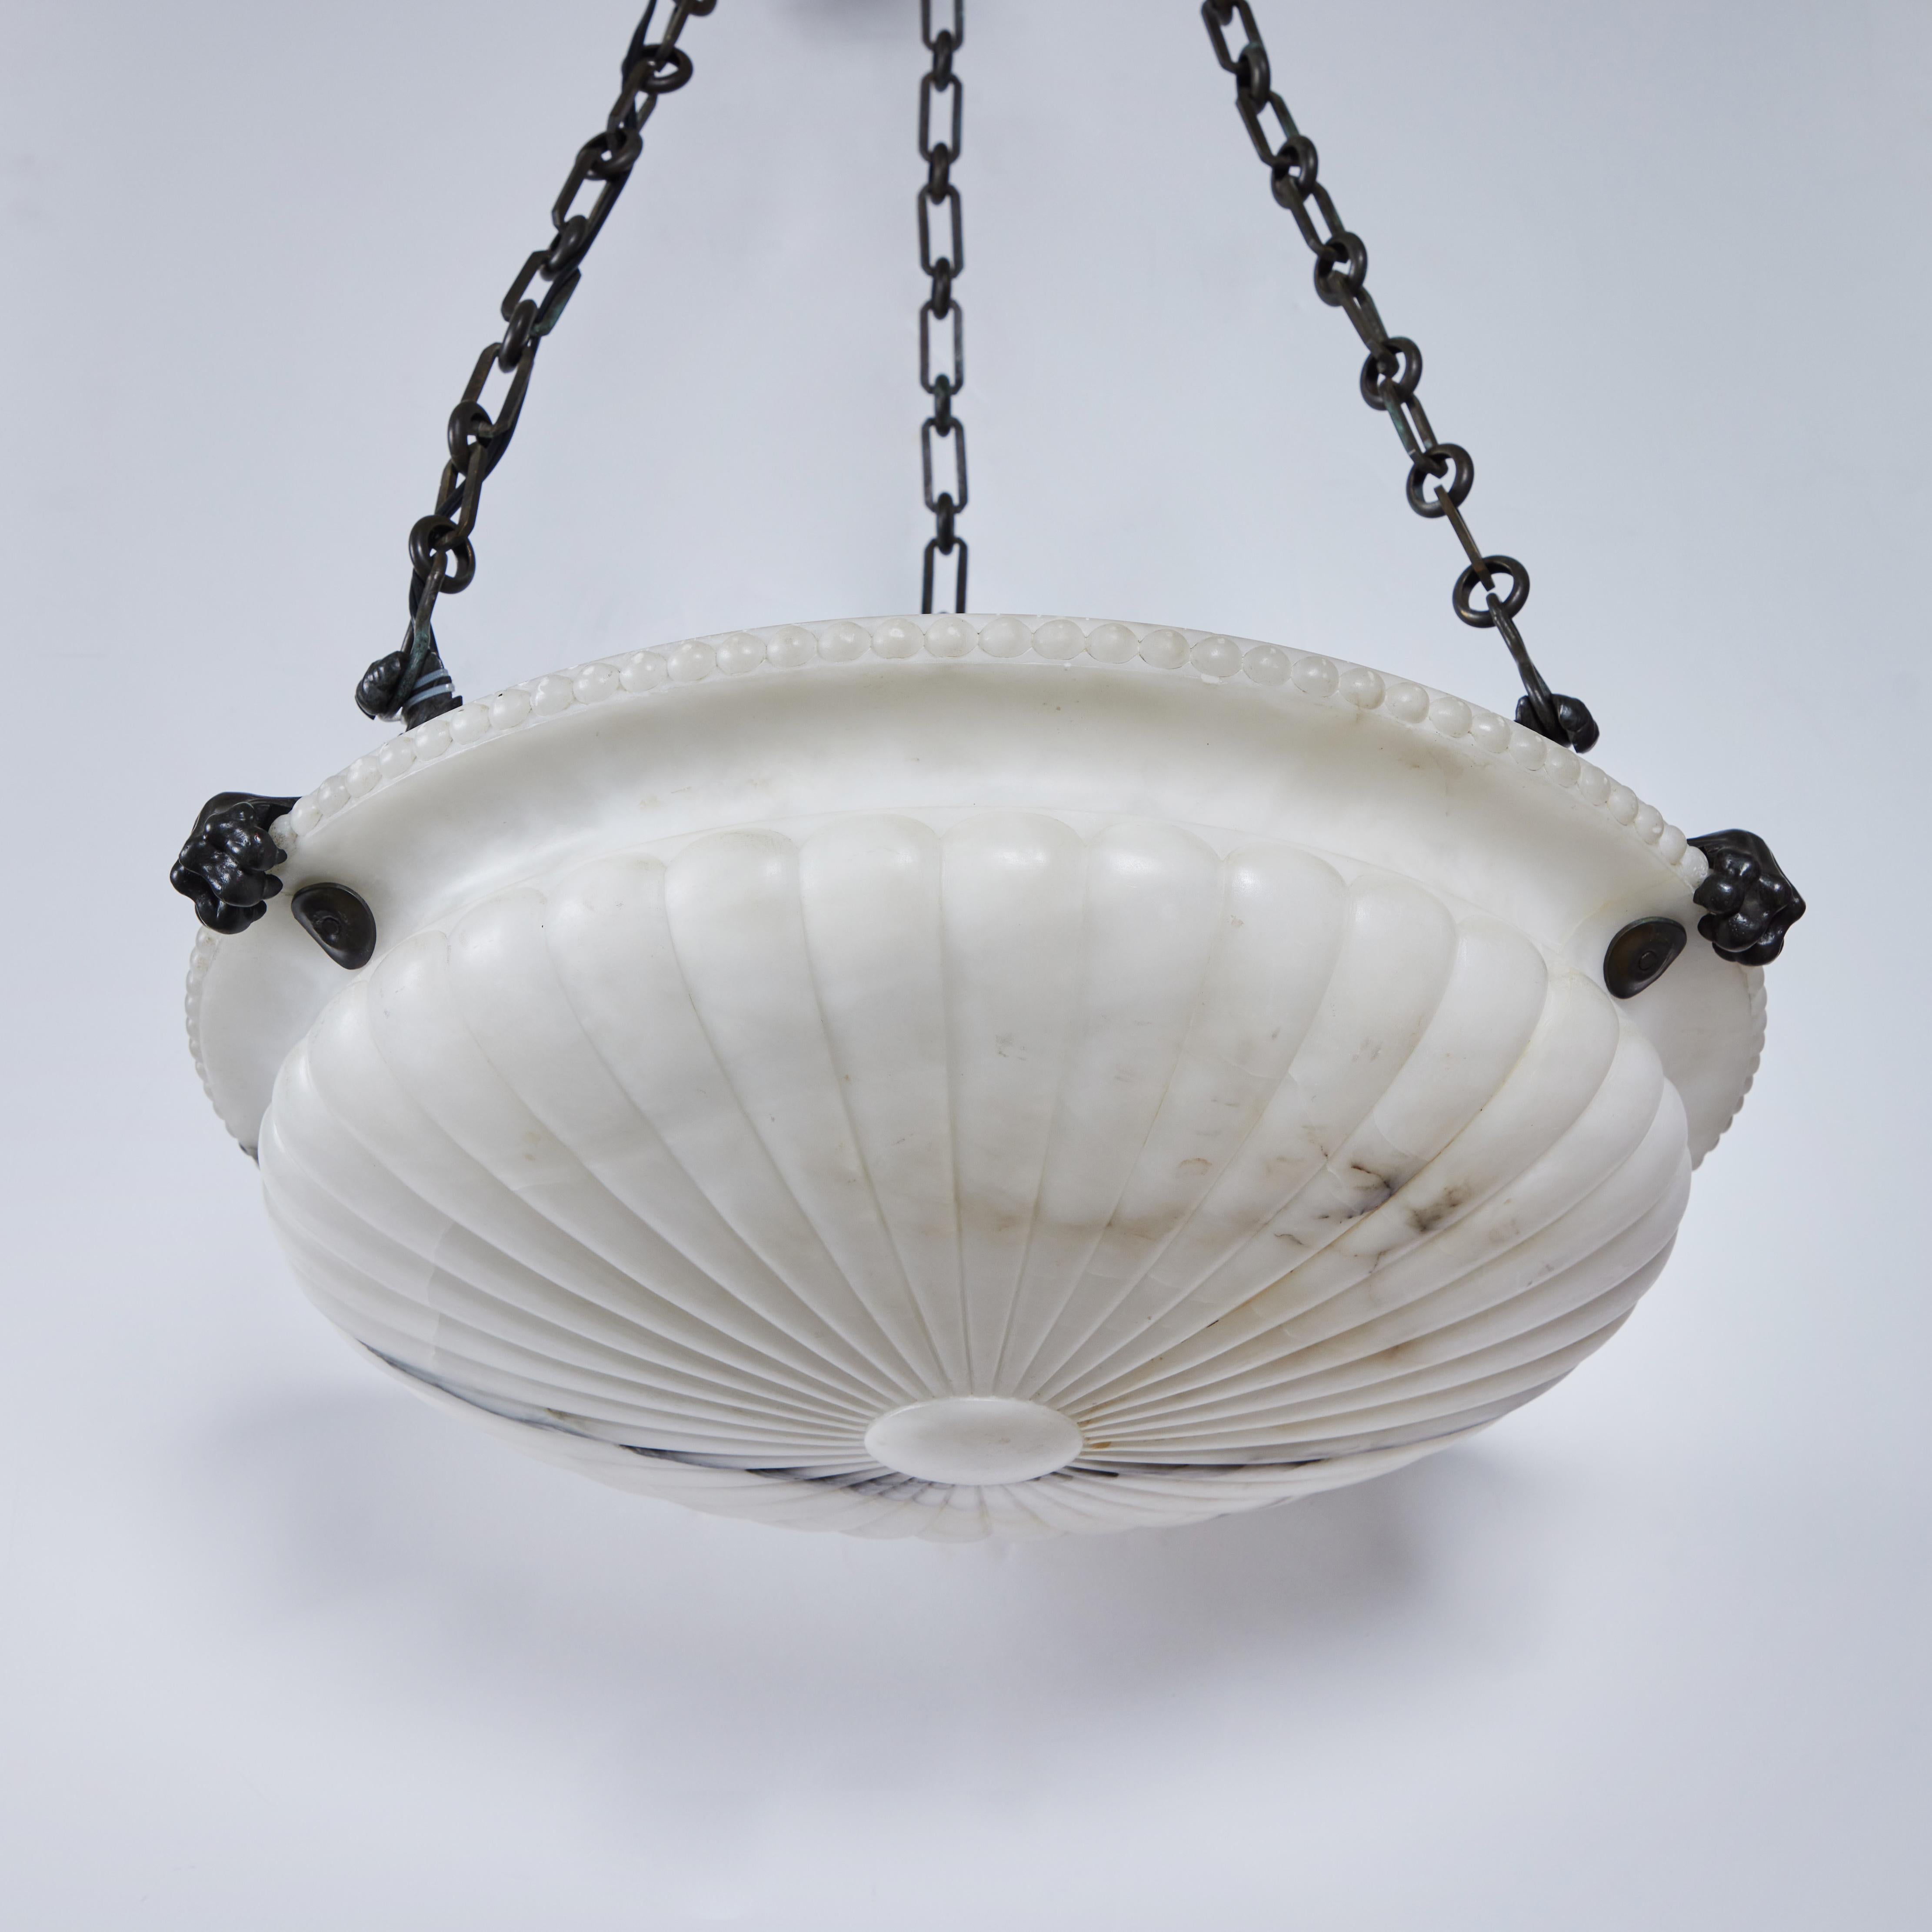 Beautifully hand-carved alabaster chandelier with the classic circular flared design. Held by 3 claws, chains and acanthus leaf canopy.  